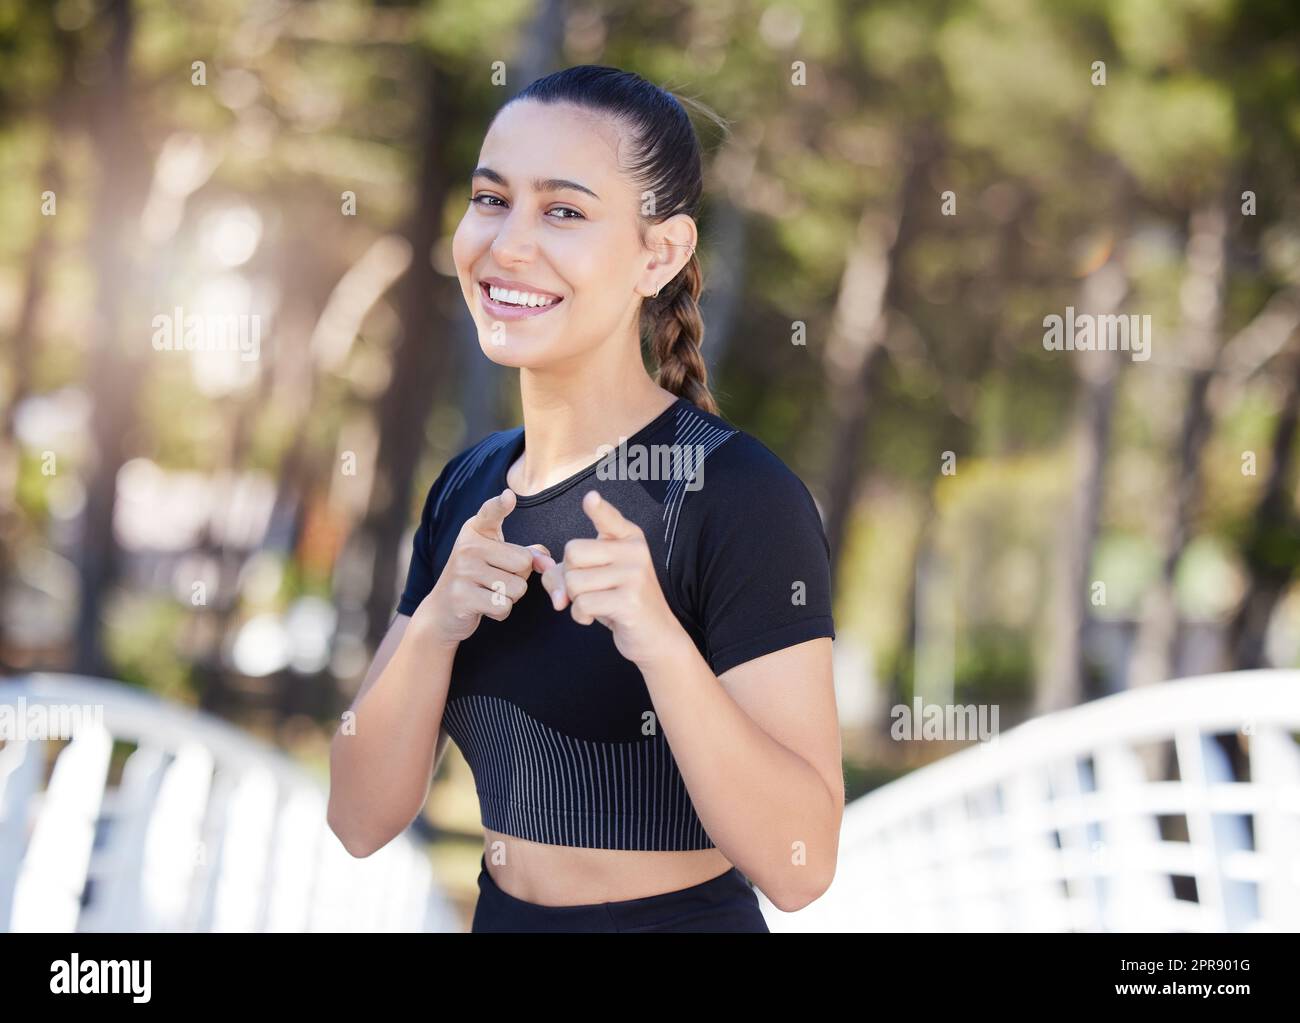 Fitness. Woman Doing Workout Exercise On Street. Beautiful Fit Girl Wearing  Fitness Tracker, Headphones And Armband Phone Case Stretching Her Long Legs  Outdoors. Sports Devices. High Resolution Stock Photo, Picture and Royalty